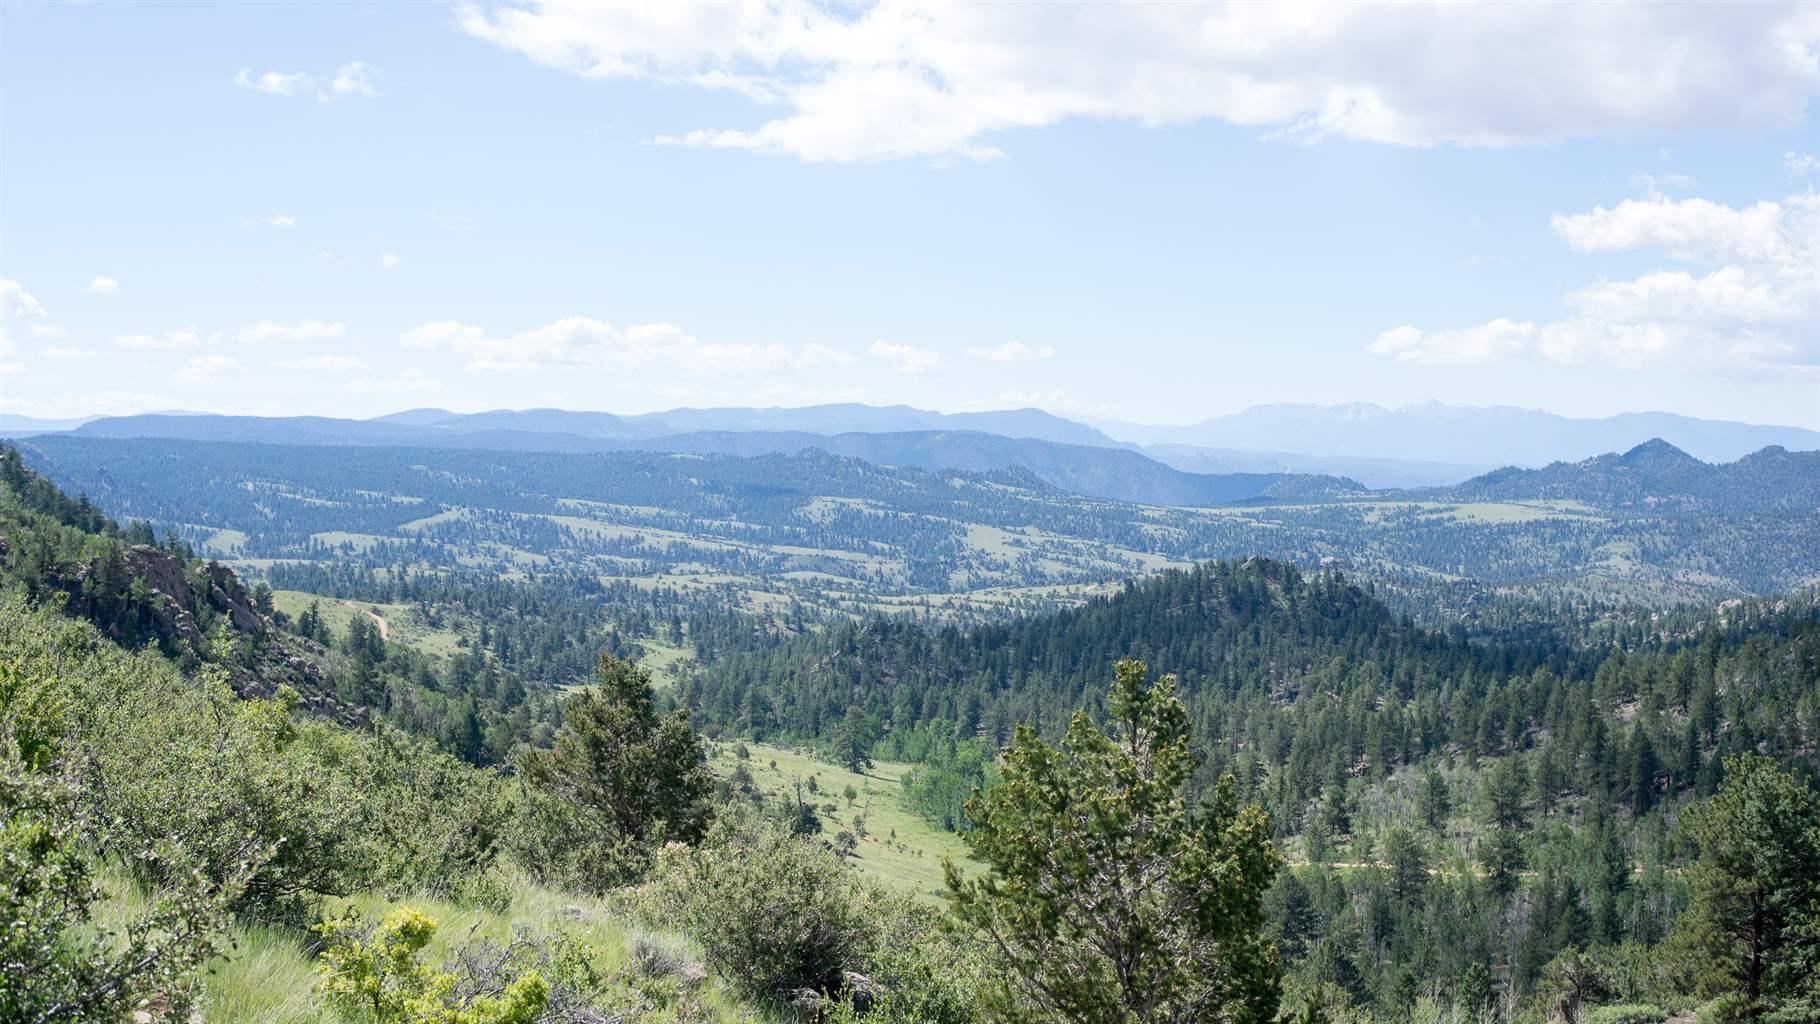 A swath of that forest, as seen from the Davis Meadow Trail, is a haven for wildlife and people seeking outdoor recreation and solitude in a healthy, functioning ecosystem and watershed